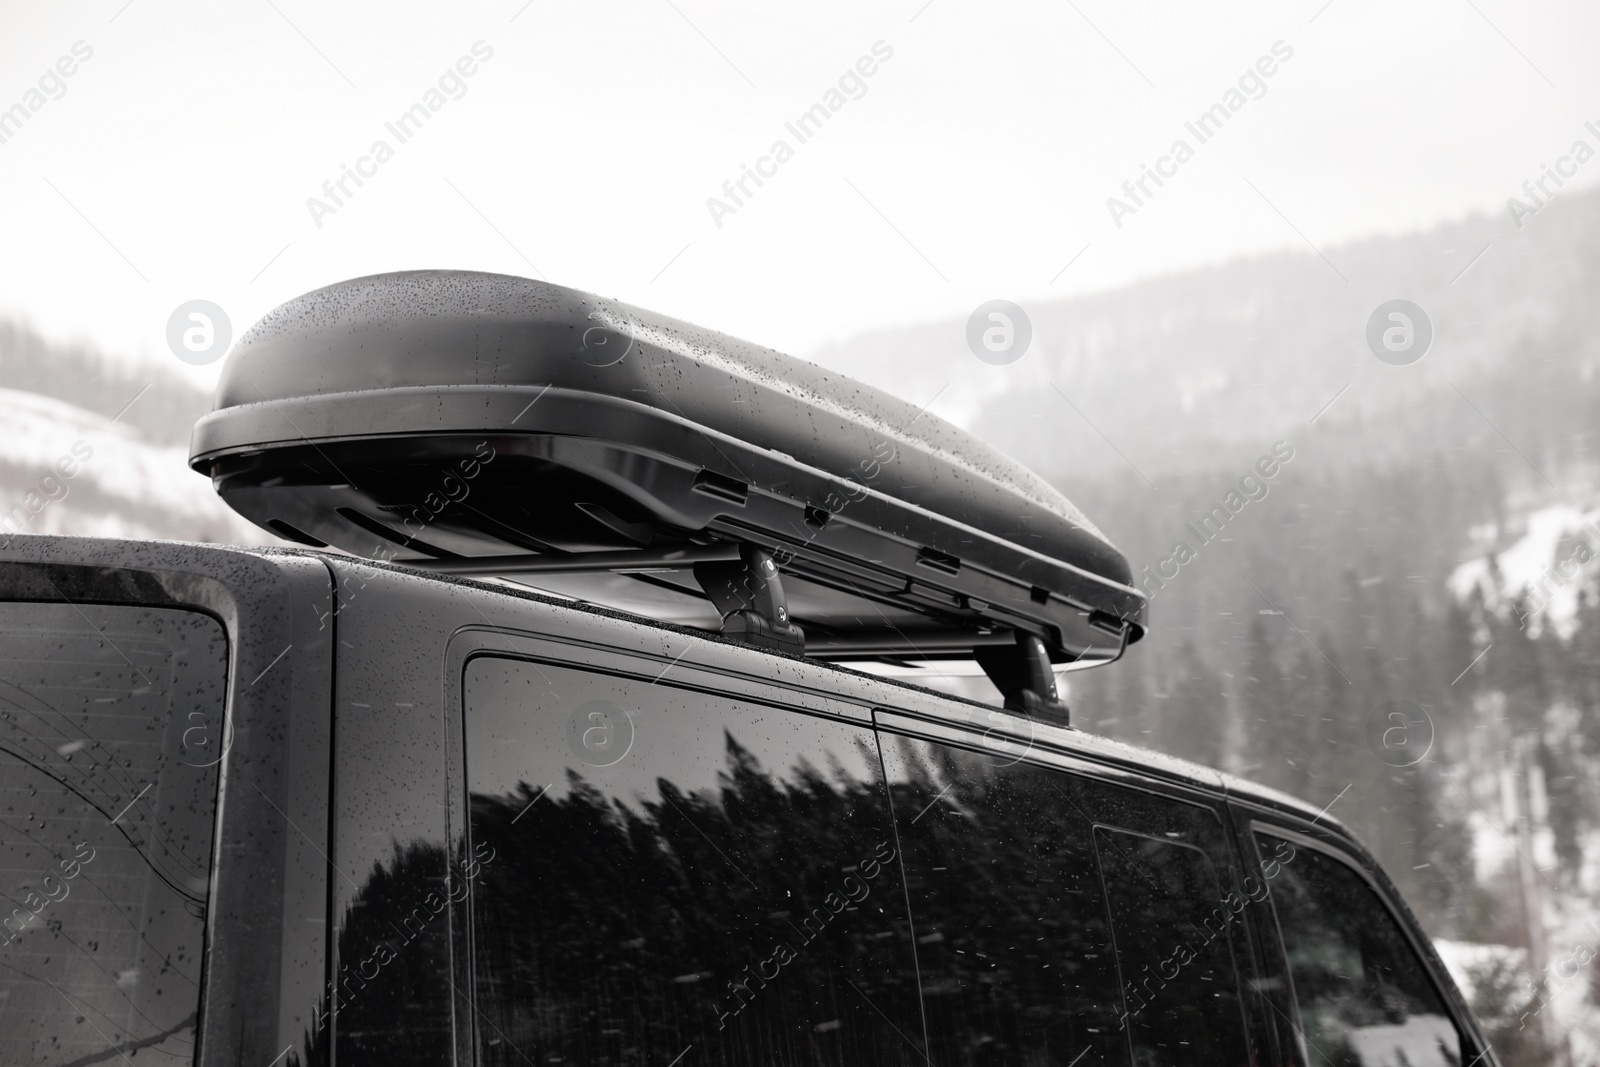 Photo of Black car with roof rack outdoors. Winter vacation